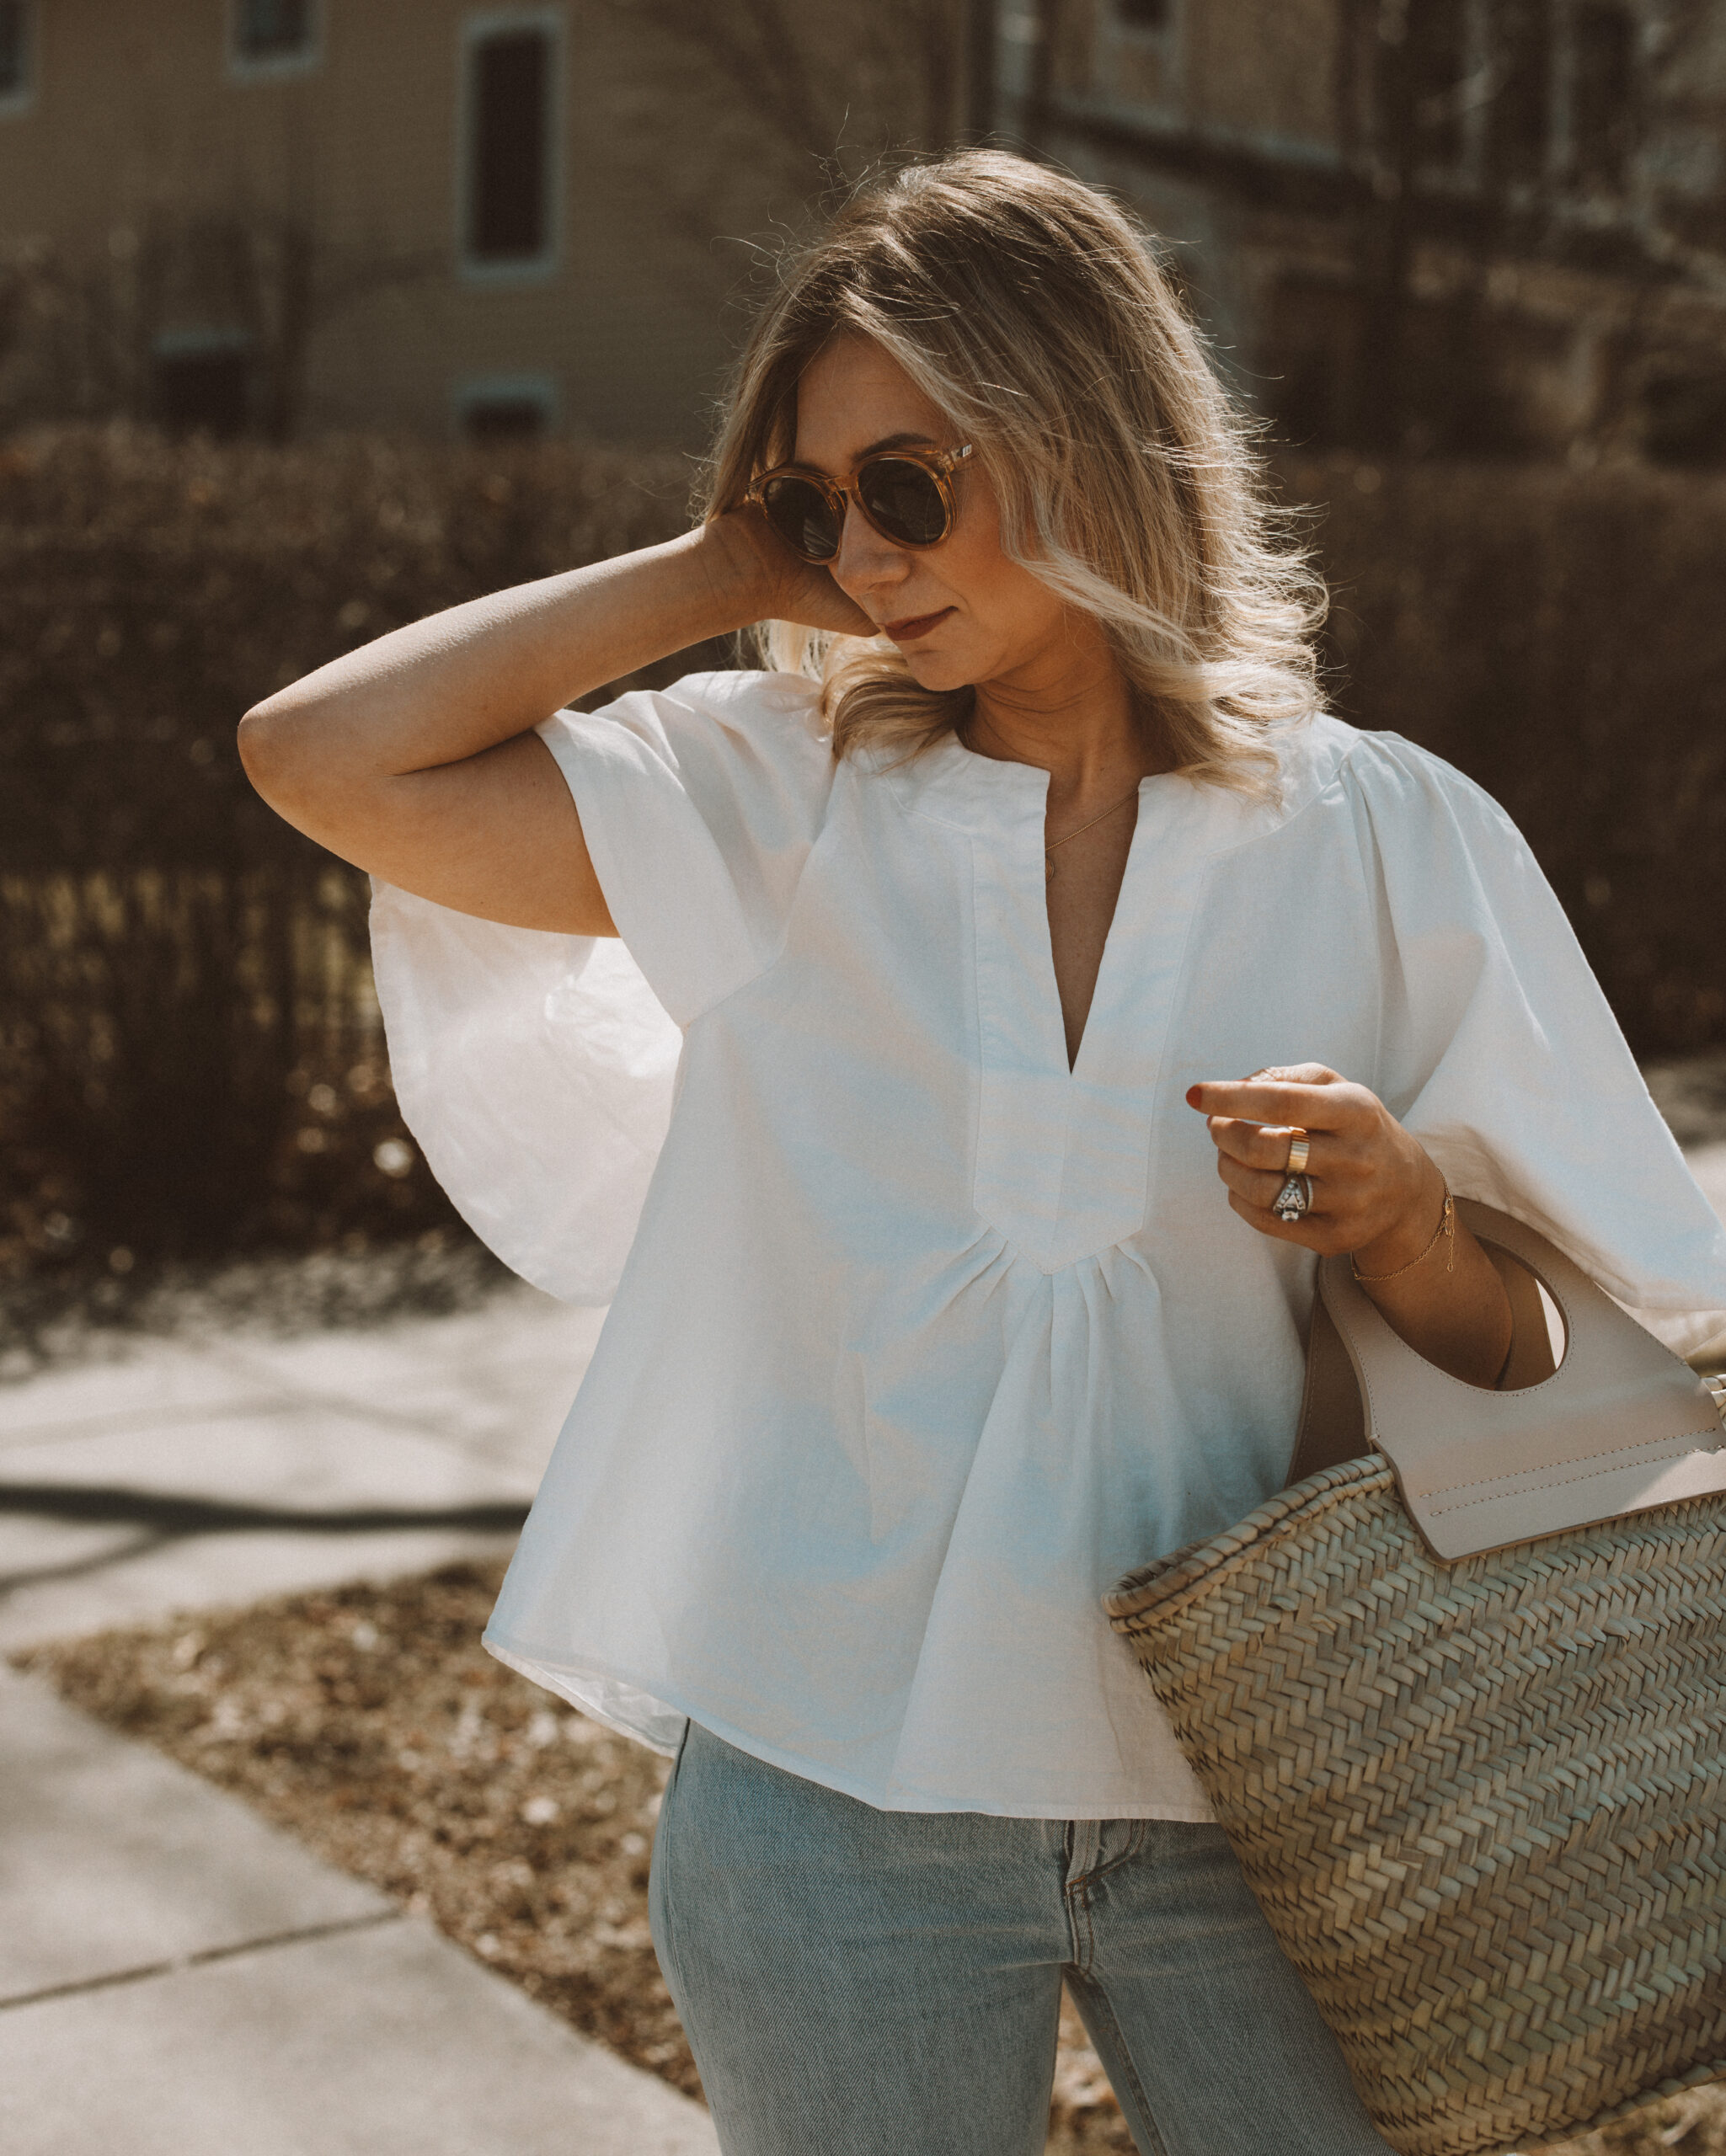 Karin Emily wears a spring top with a pair of light blue wash riley jeans from Agolde, a straw Cabas bag from Hereu, and clear framed sunglasses